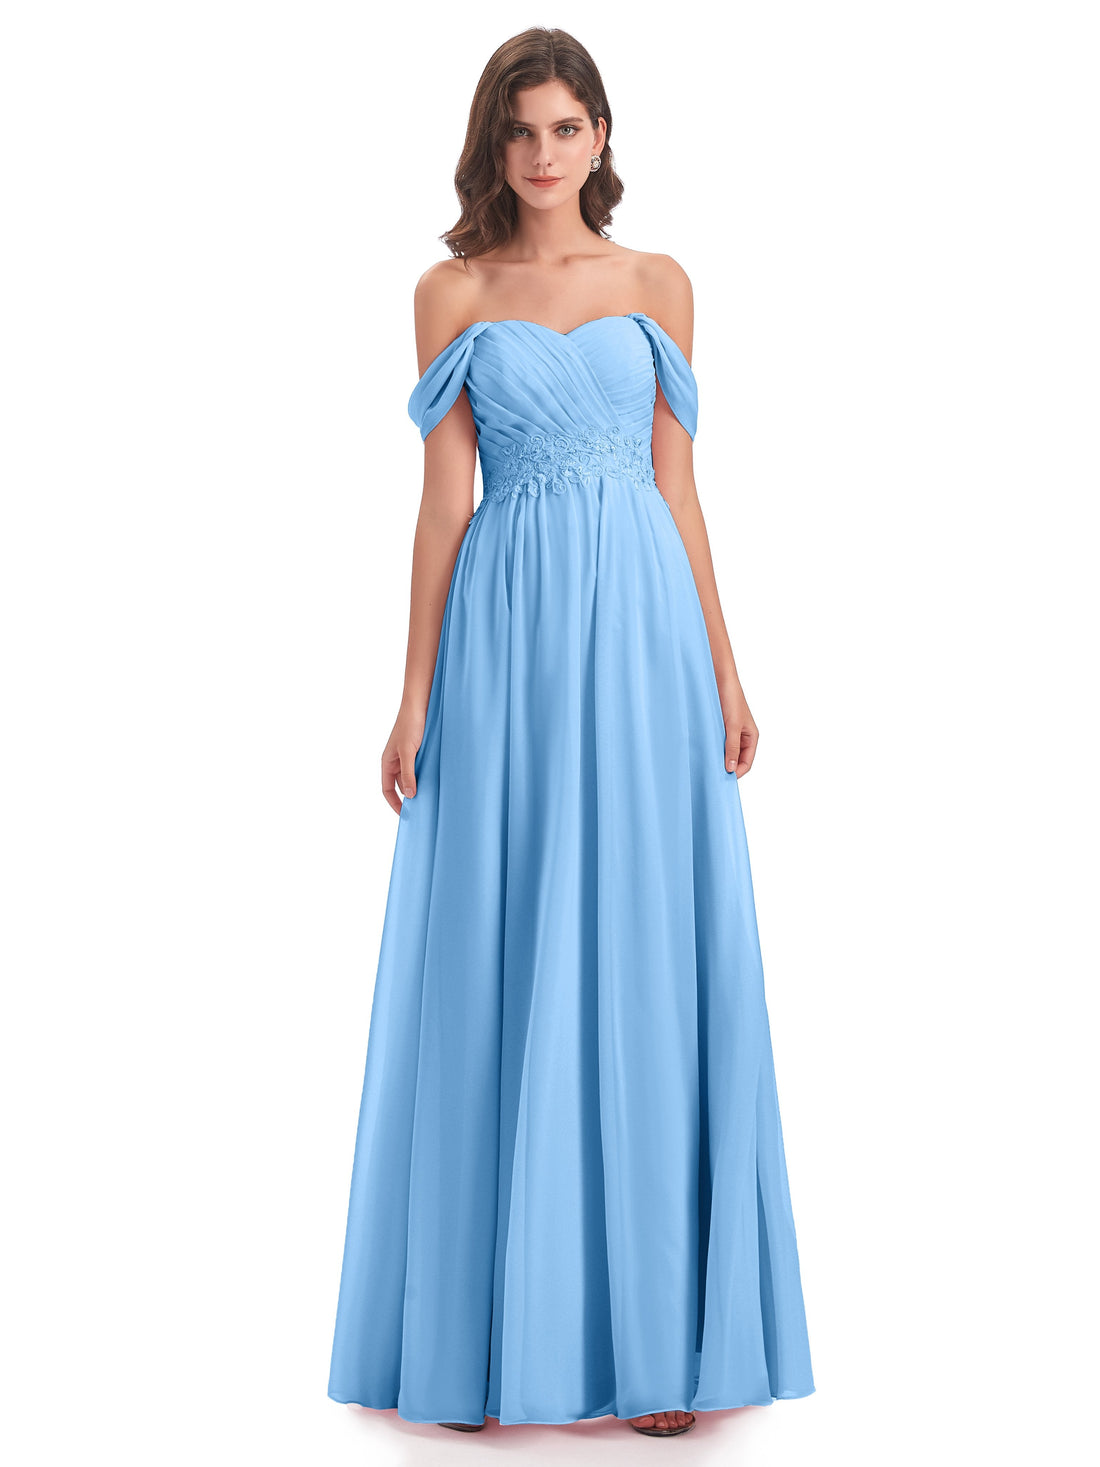 Sonia Off The Shoulder Bridesmaid Dresses With Appliques